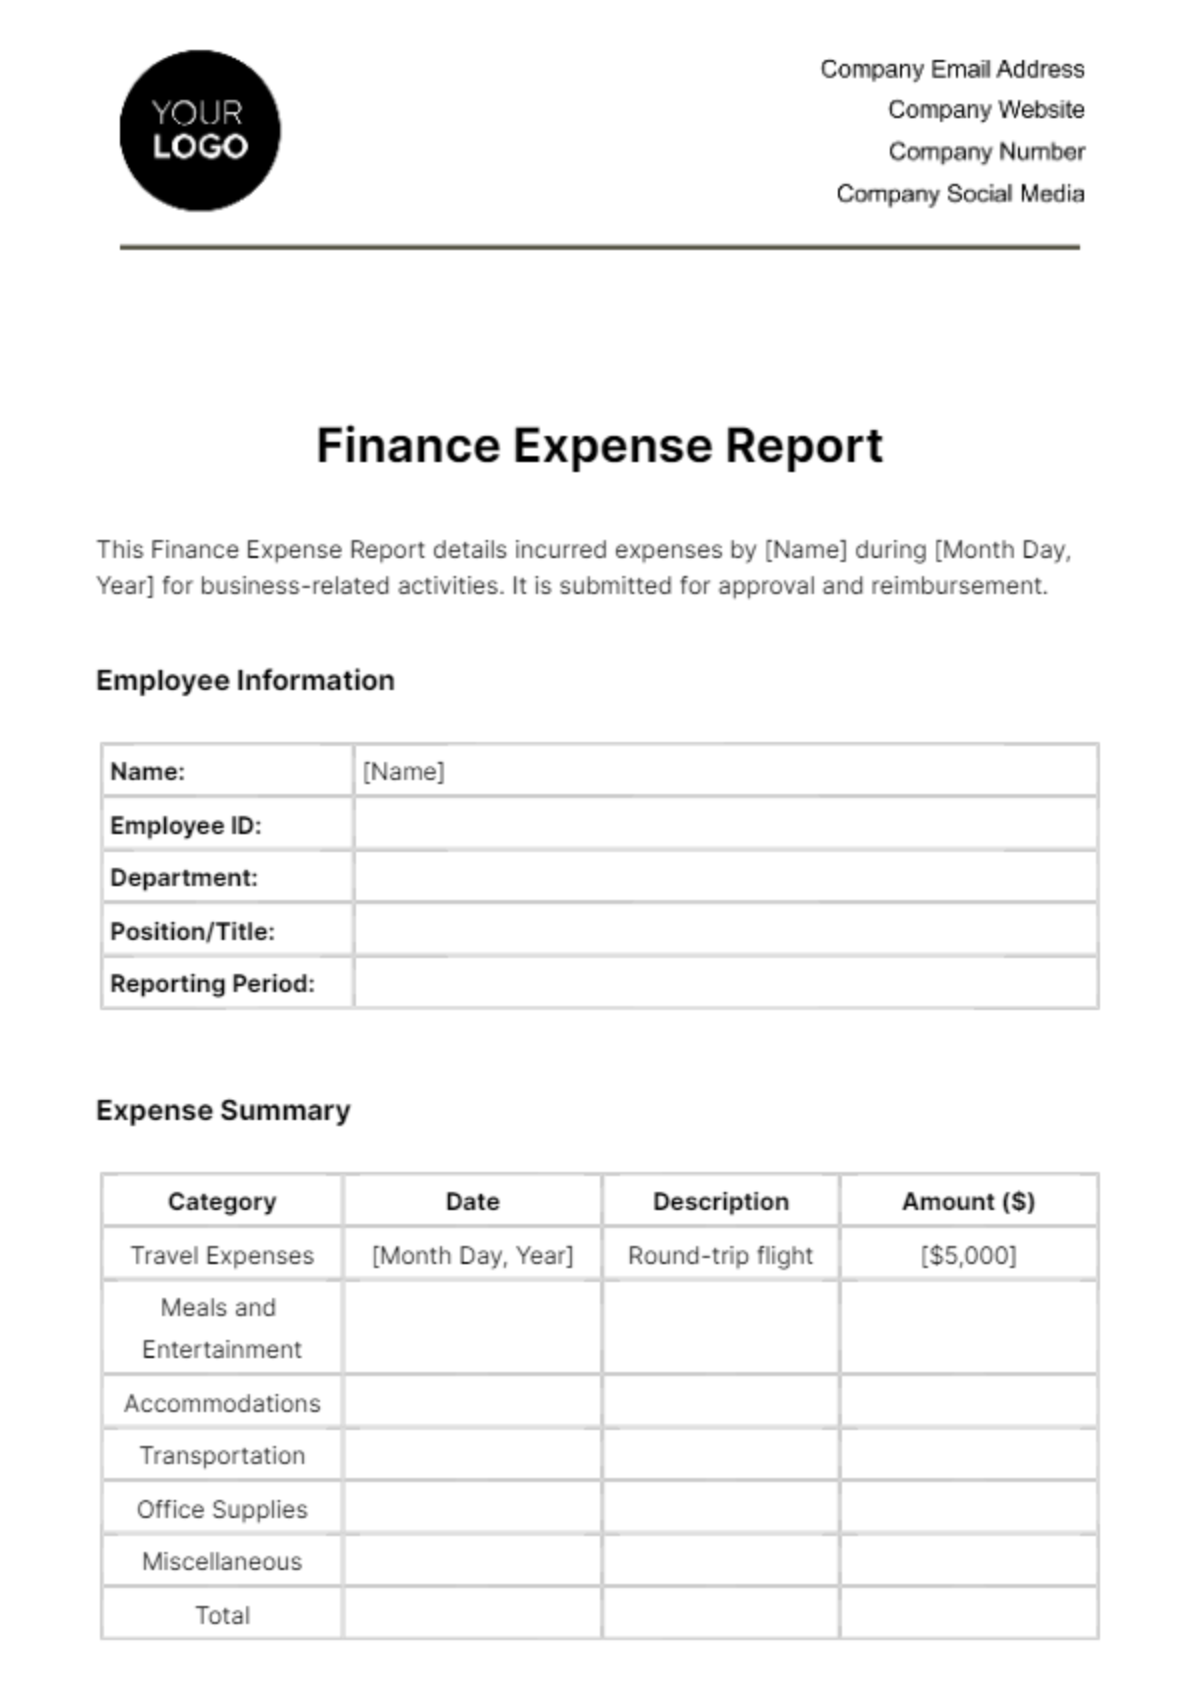 Free Finance Expense Report Template